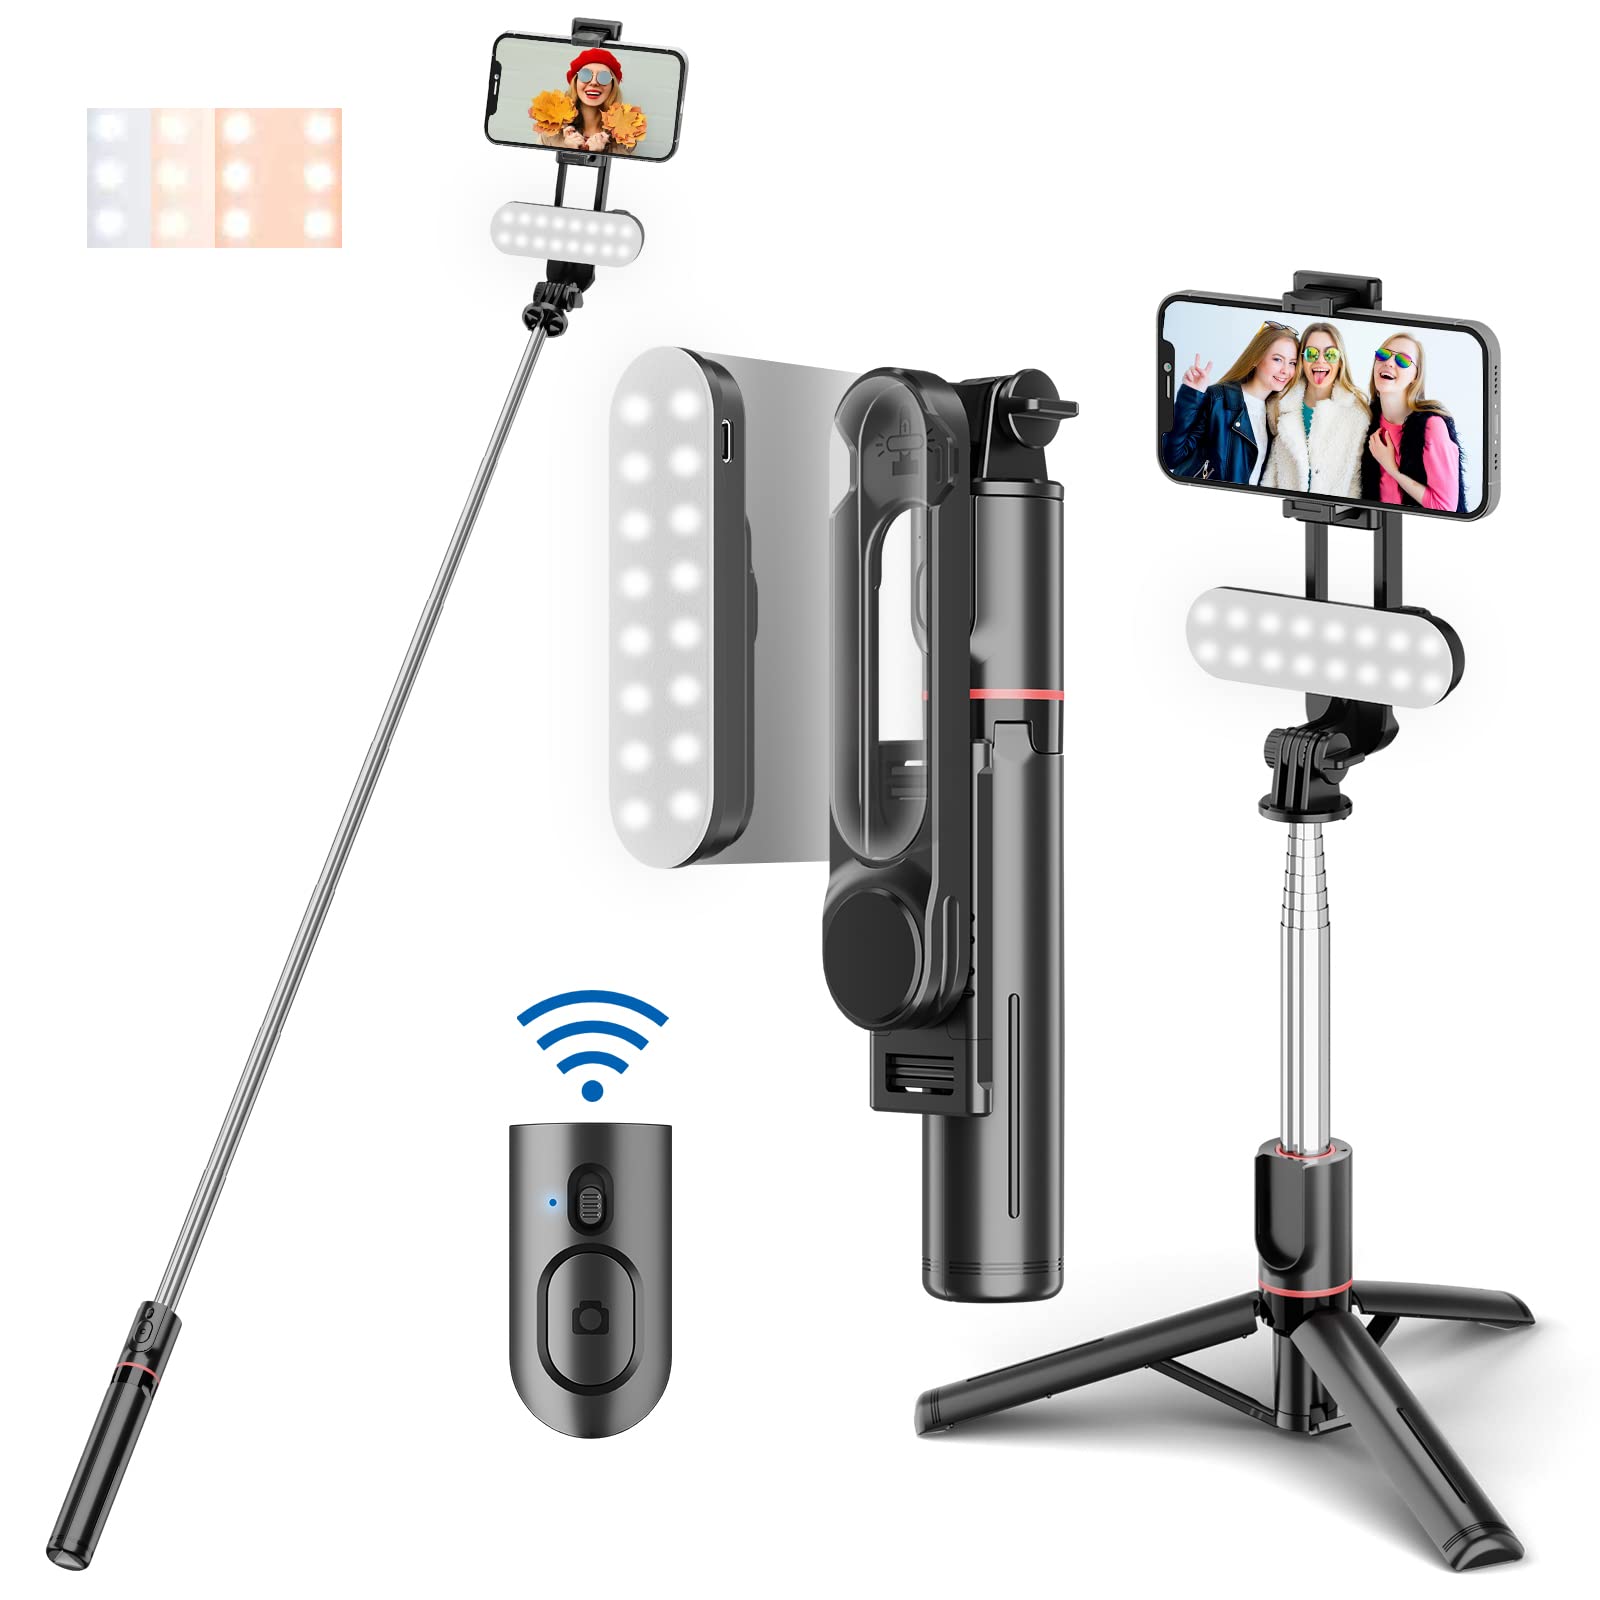 Selfie Stick for iPhone - Upgrade Detachable Selfie Light, 44 Inch Extendable Tripod with Wireless Remote, 3 Light Modes, 9 Brightness Levels, Compatible with All iPhone & Android Devices-OXIMETERBUY